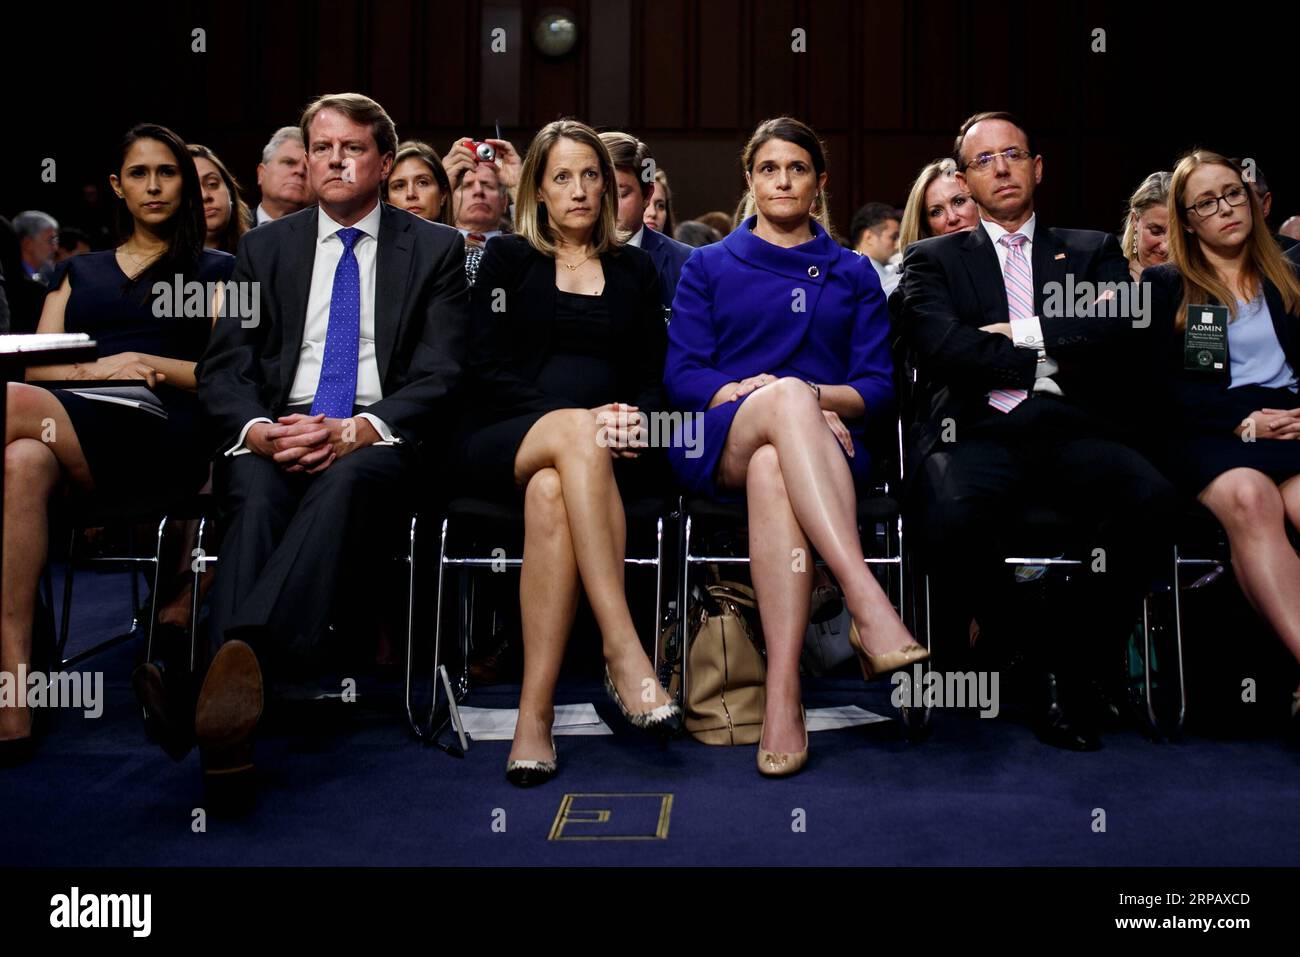 (190521) -- WASHINGTON D.C., May 21, 2019 -- Then White House counsel Don McGahn (front 2nd L) reacts in the audience during the confirmation hearing for Supreme Court Justice nominee Brett Kavanaugh before the U.S. Senate Judiciary Committee on Capitol Hill in Washington D.C., the United States, on Sept. 4, 2018. The White House on Monday instructed former counsel Don McGahn to defy a congressional subpoena and skip a hearing scheduled for Tuesday relating to the Russia probe. ) U.S.-WASHINGTON D.C.-DON MCGAHN-SUBPOENA TingxShen PUBLICATIONxNOTxINxCHN Stock Photo